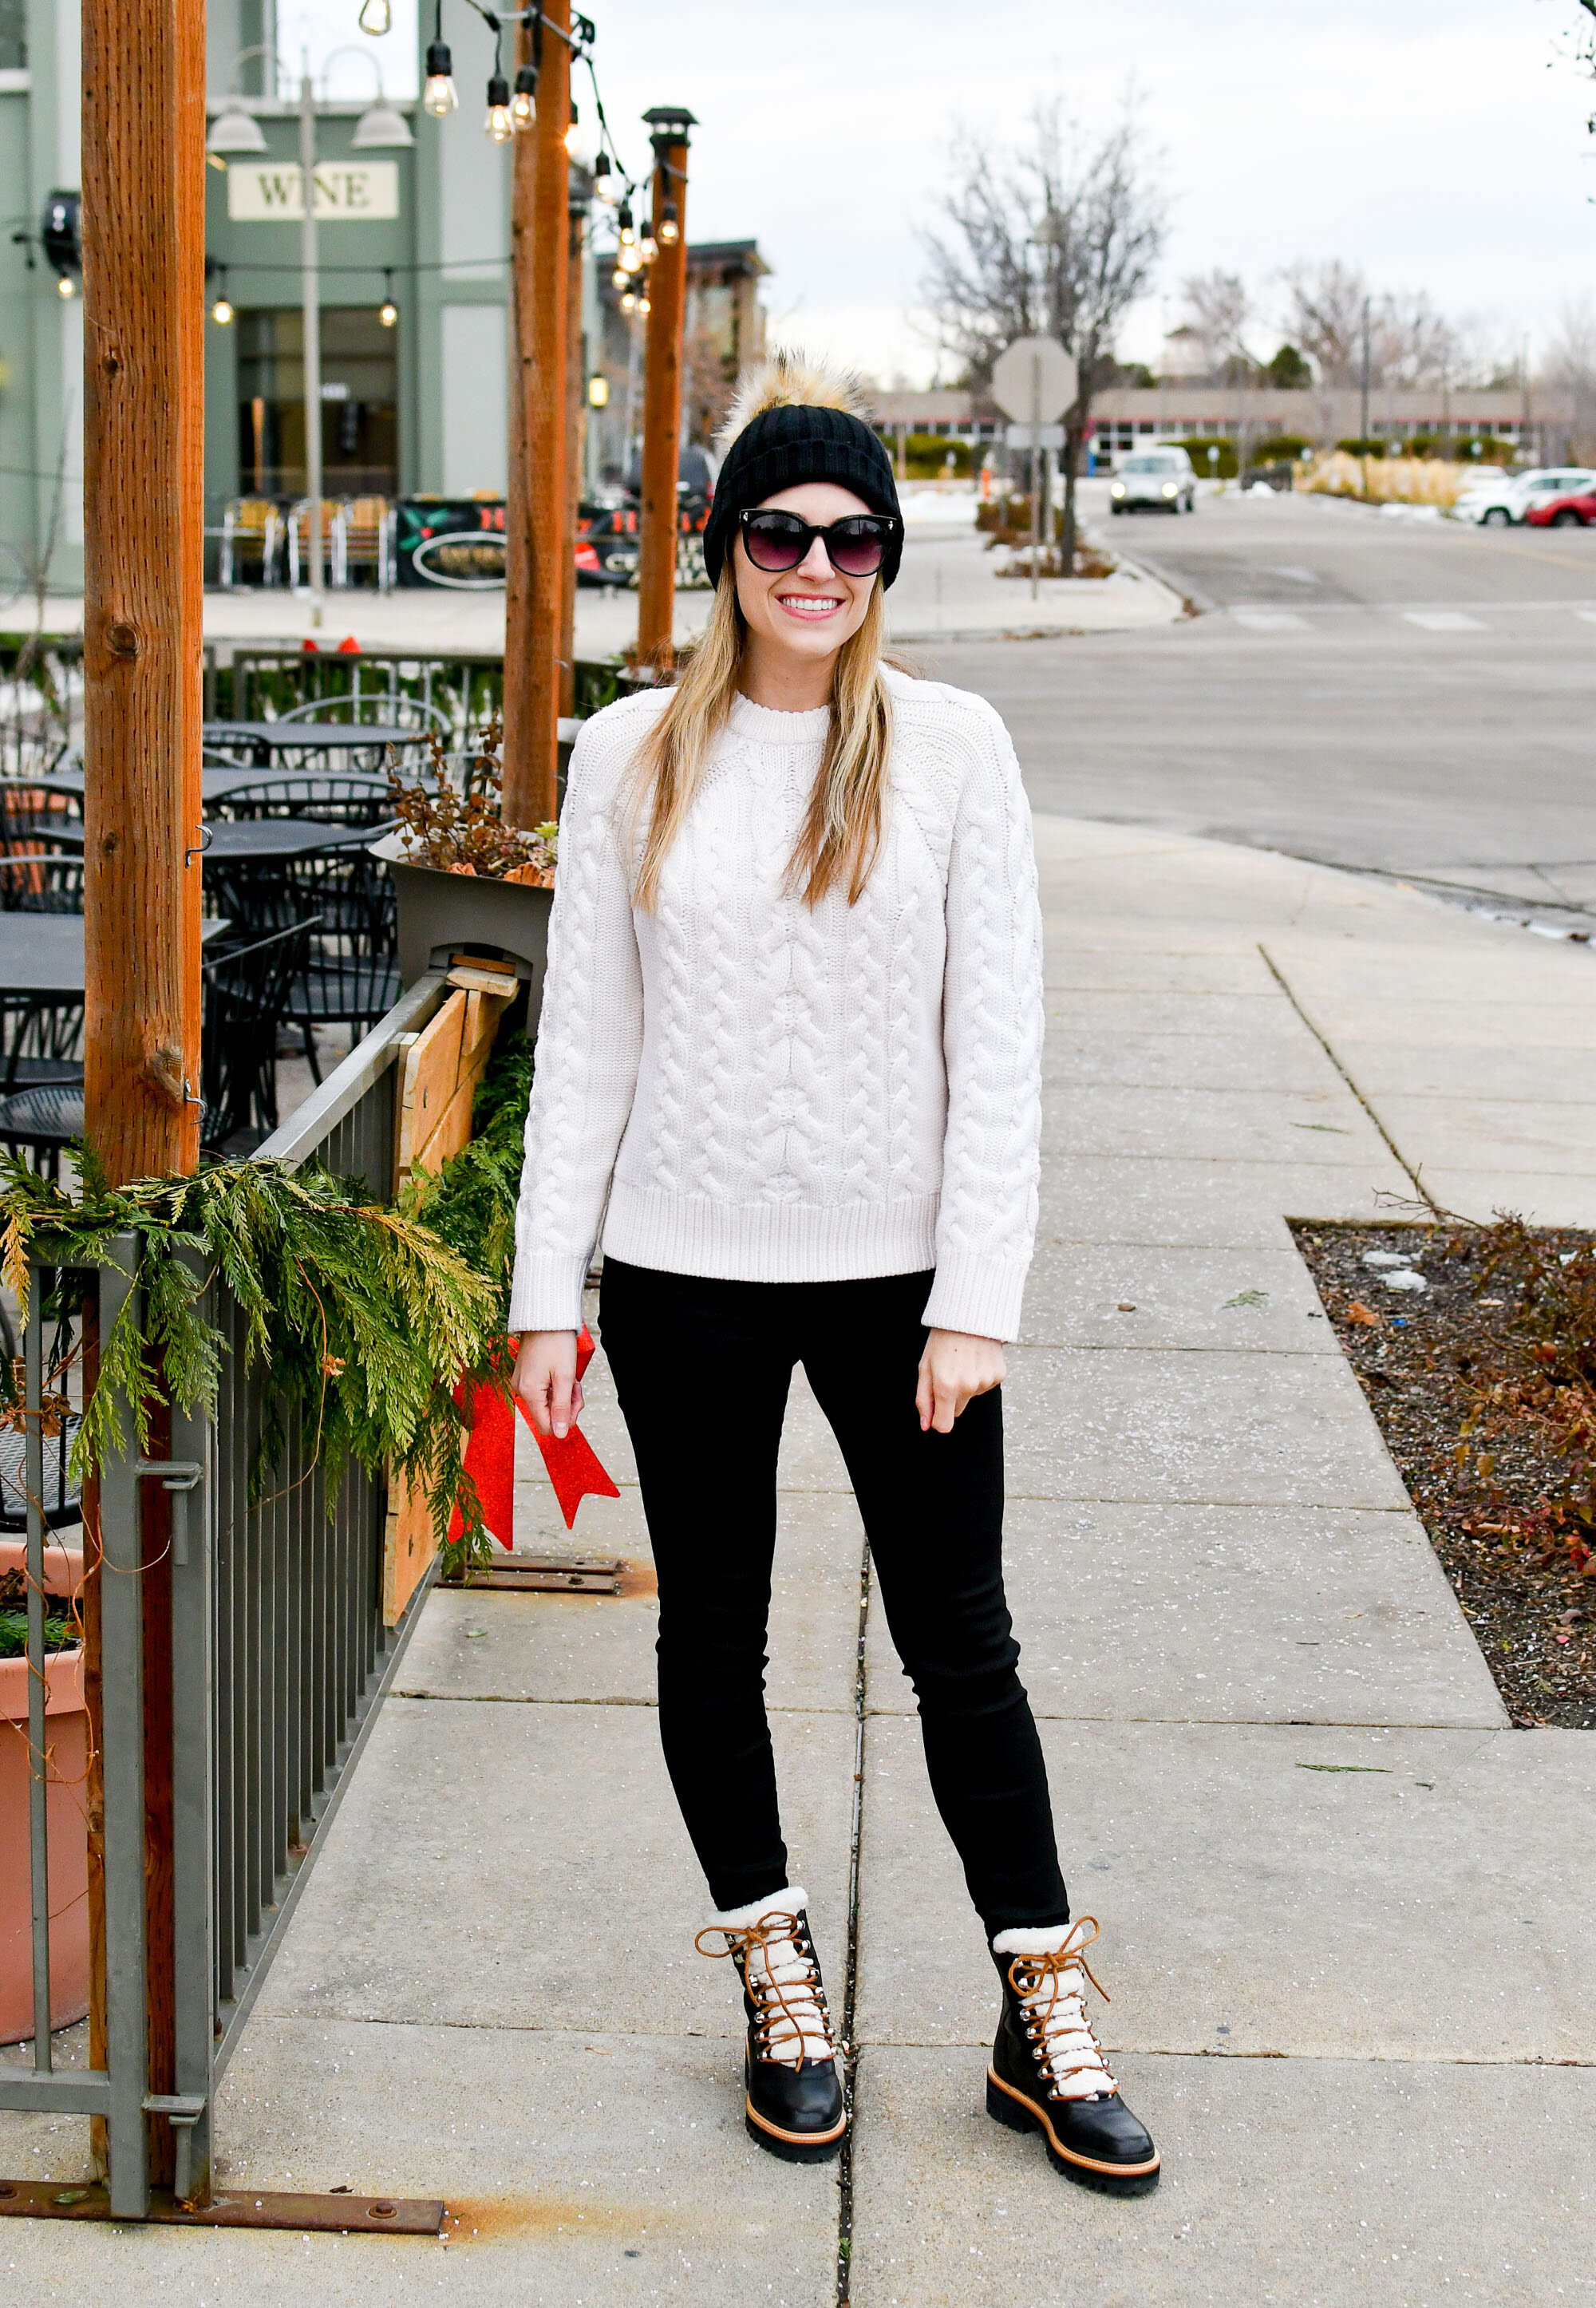 Dress like a tuxedo cat / winter outfit — Cotton Cashmere Cat Hair